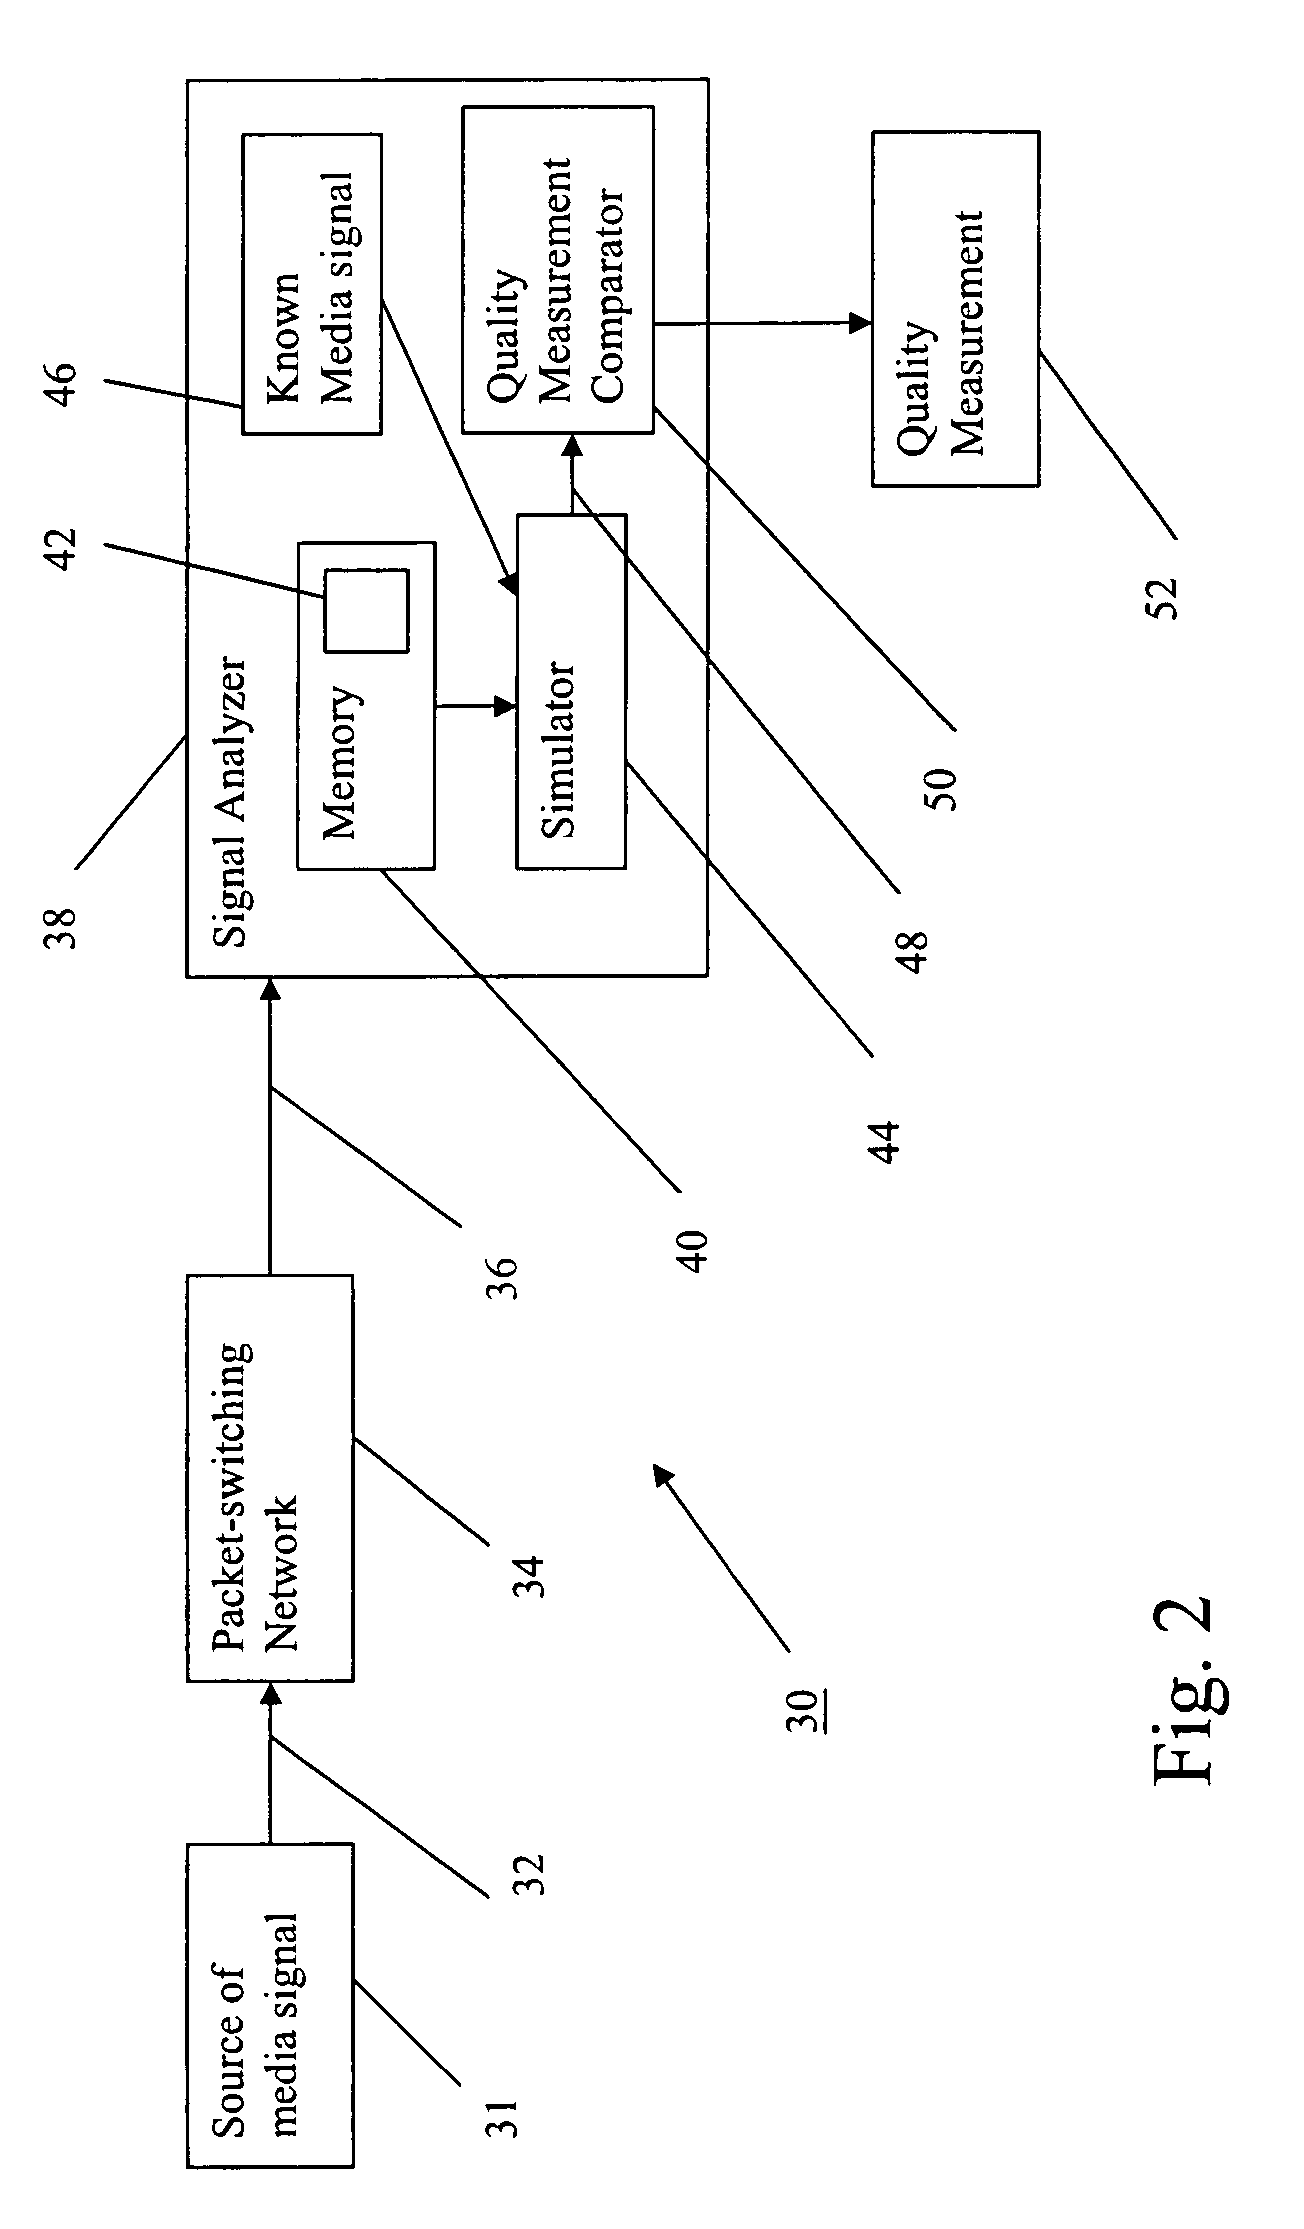 Passive system and method for measuring the subjective quality of real-time media streams in a packet-switching network